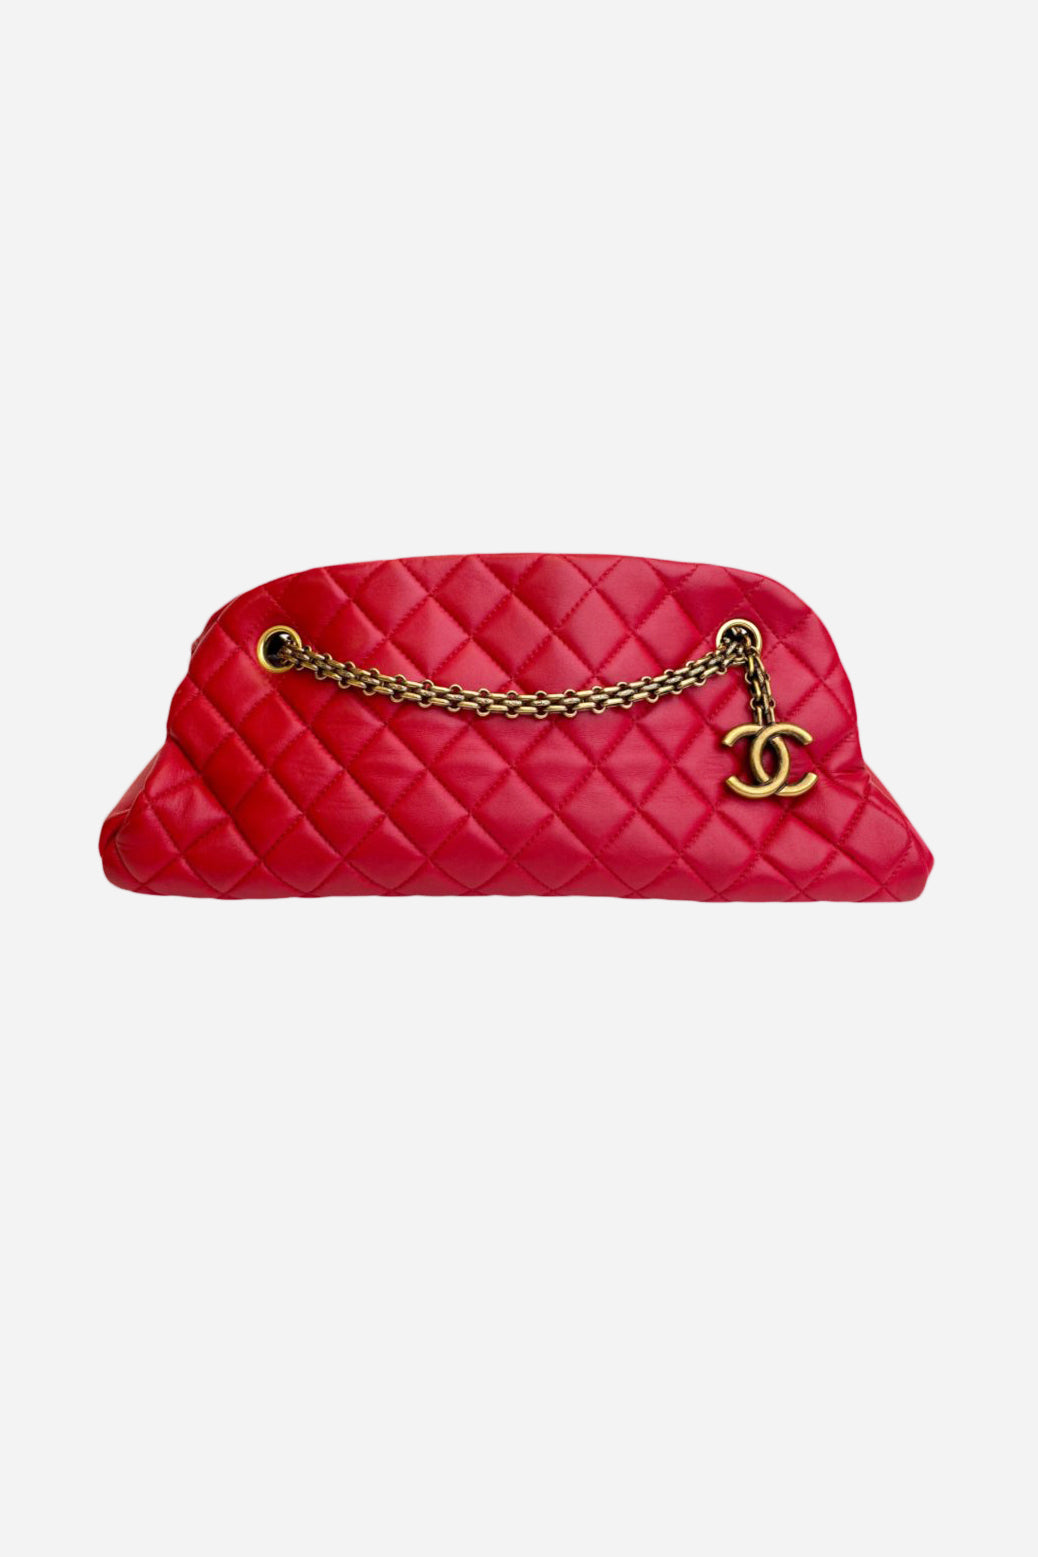 Red Quilted Mademoiselle bag